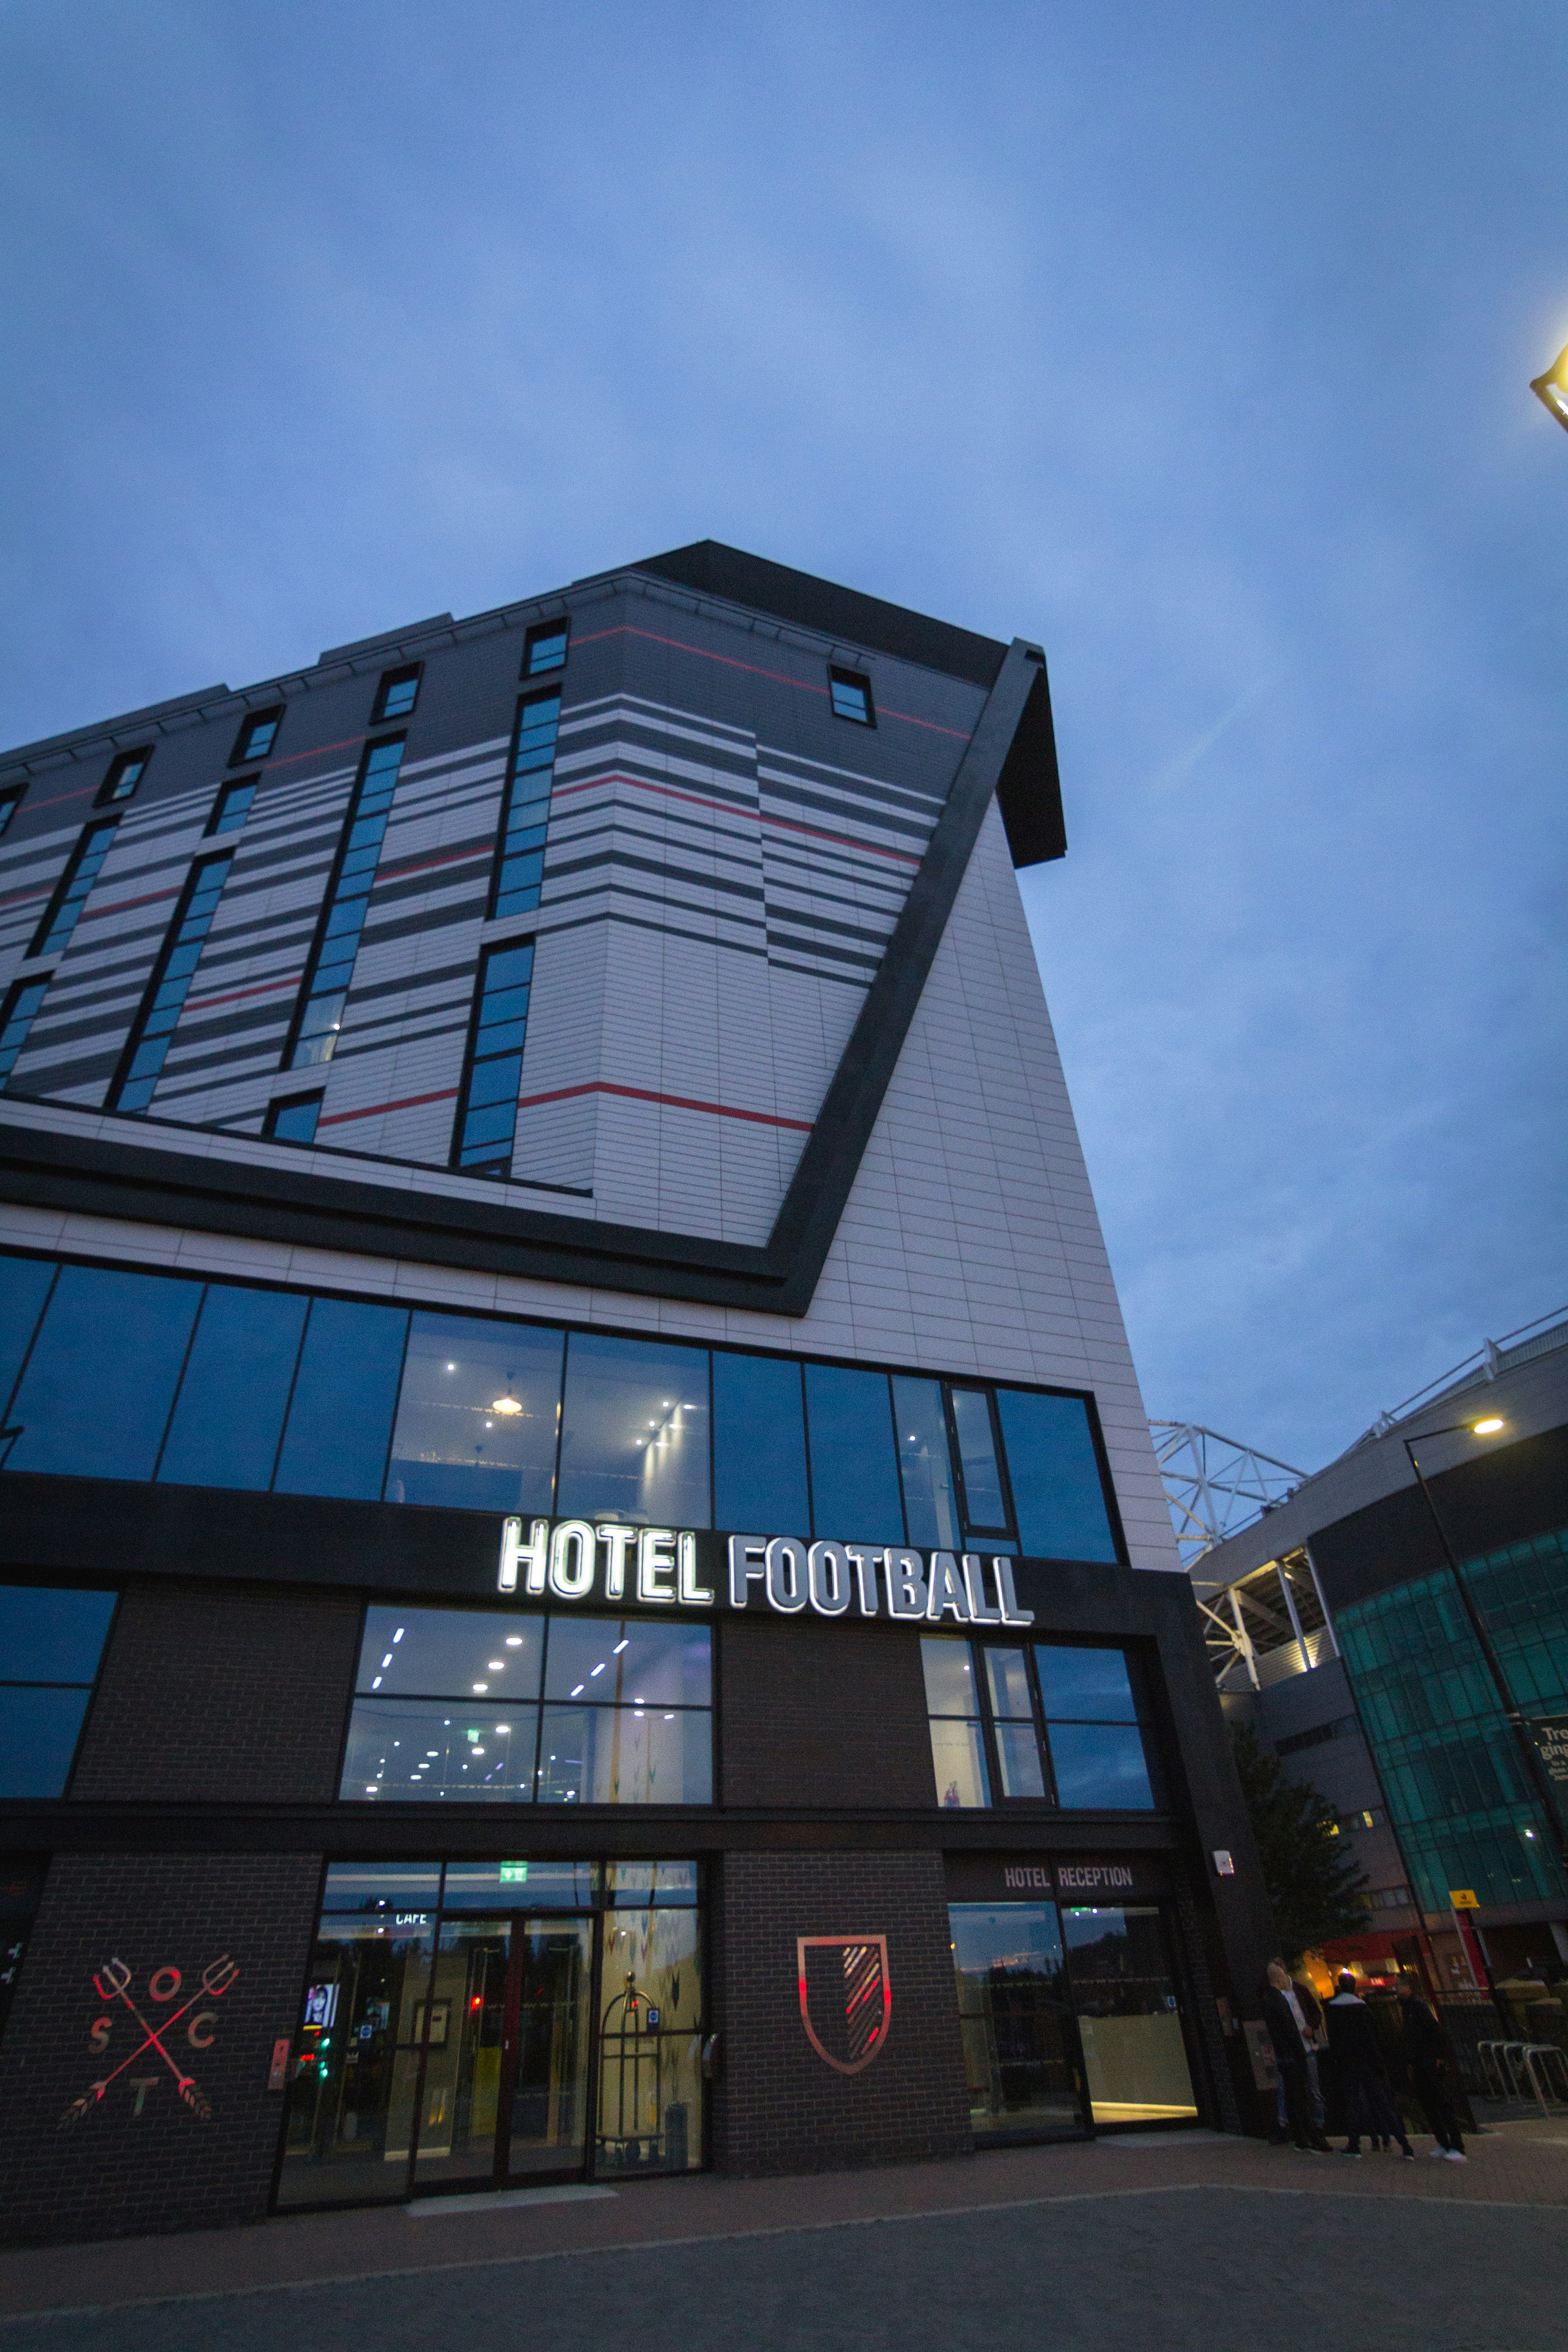 An entrance to the Hotel football, in Manchester. A group of three people are standing to the left